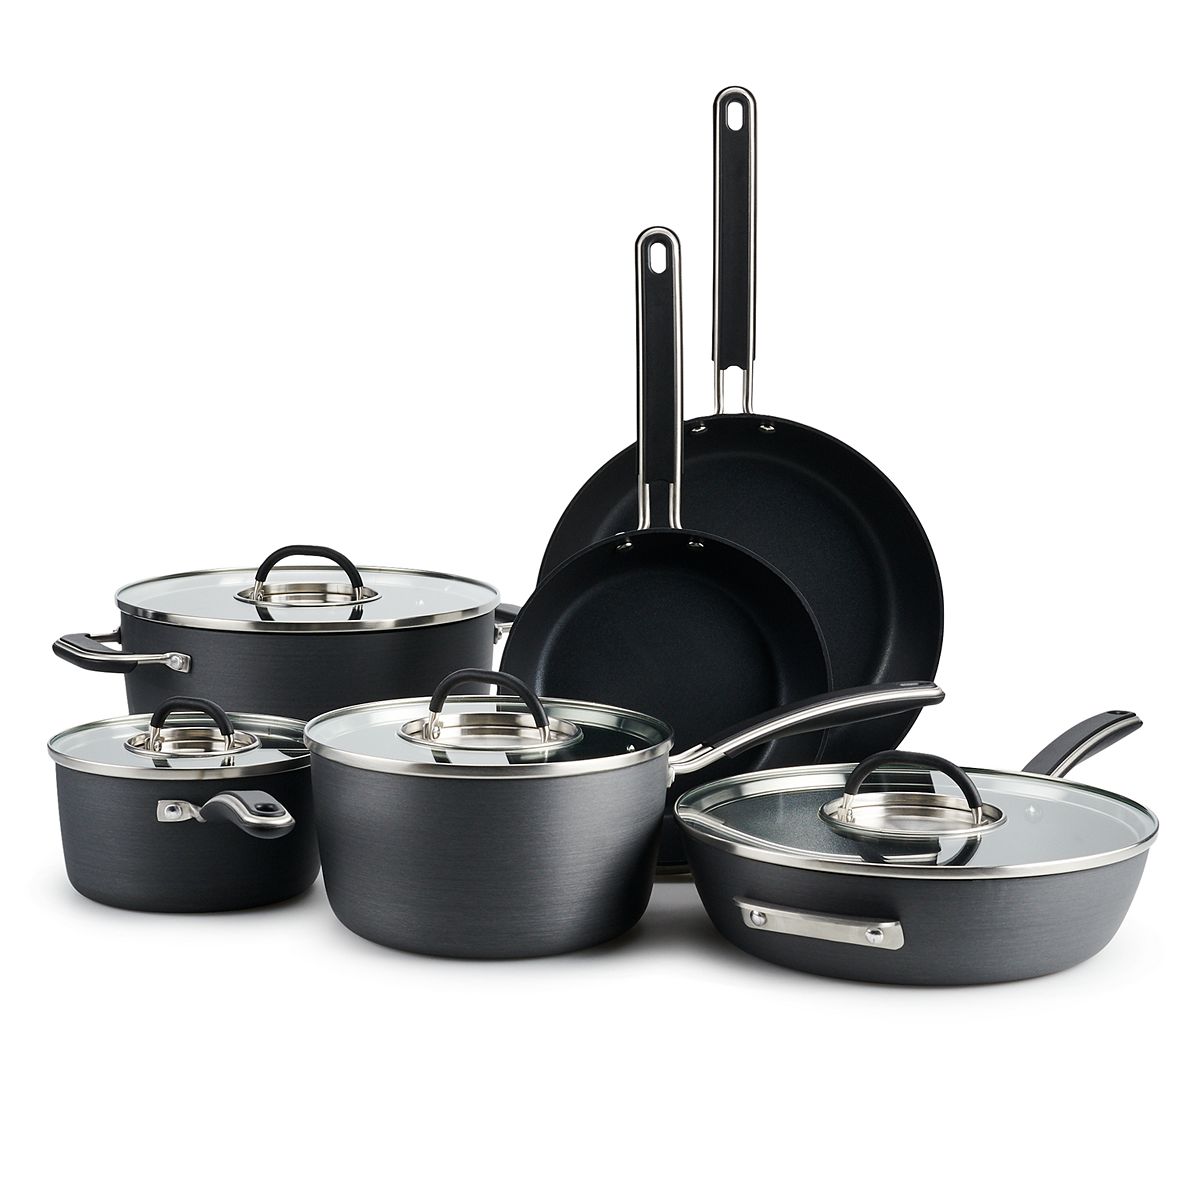 Food Network™ 10-pc. Hard-Anodized Nonstick Cookware Set $135.99